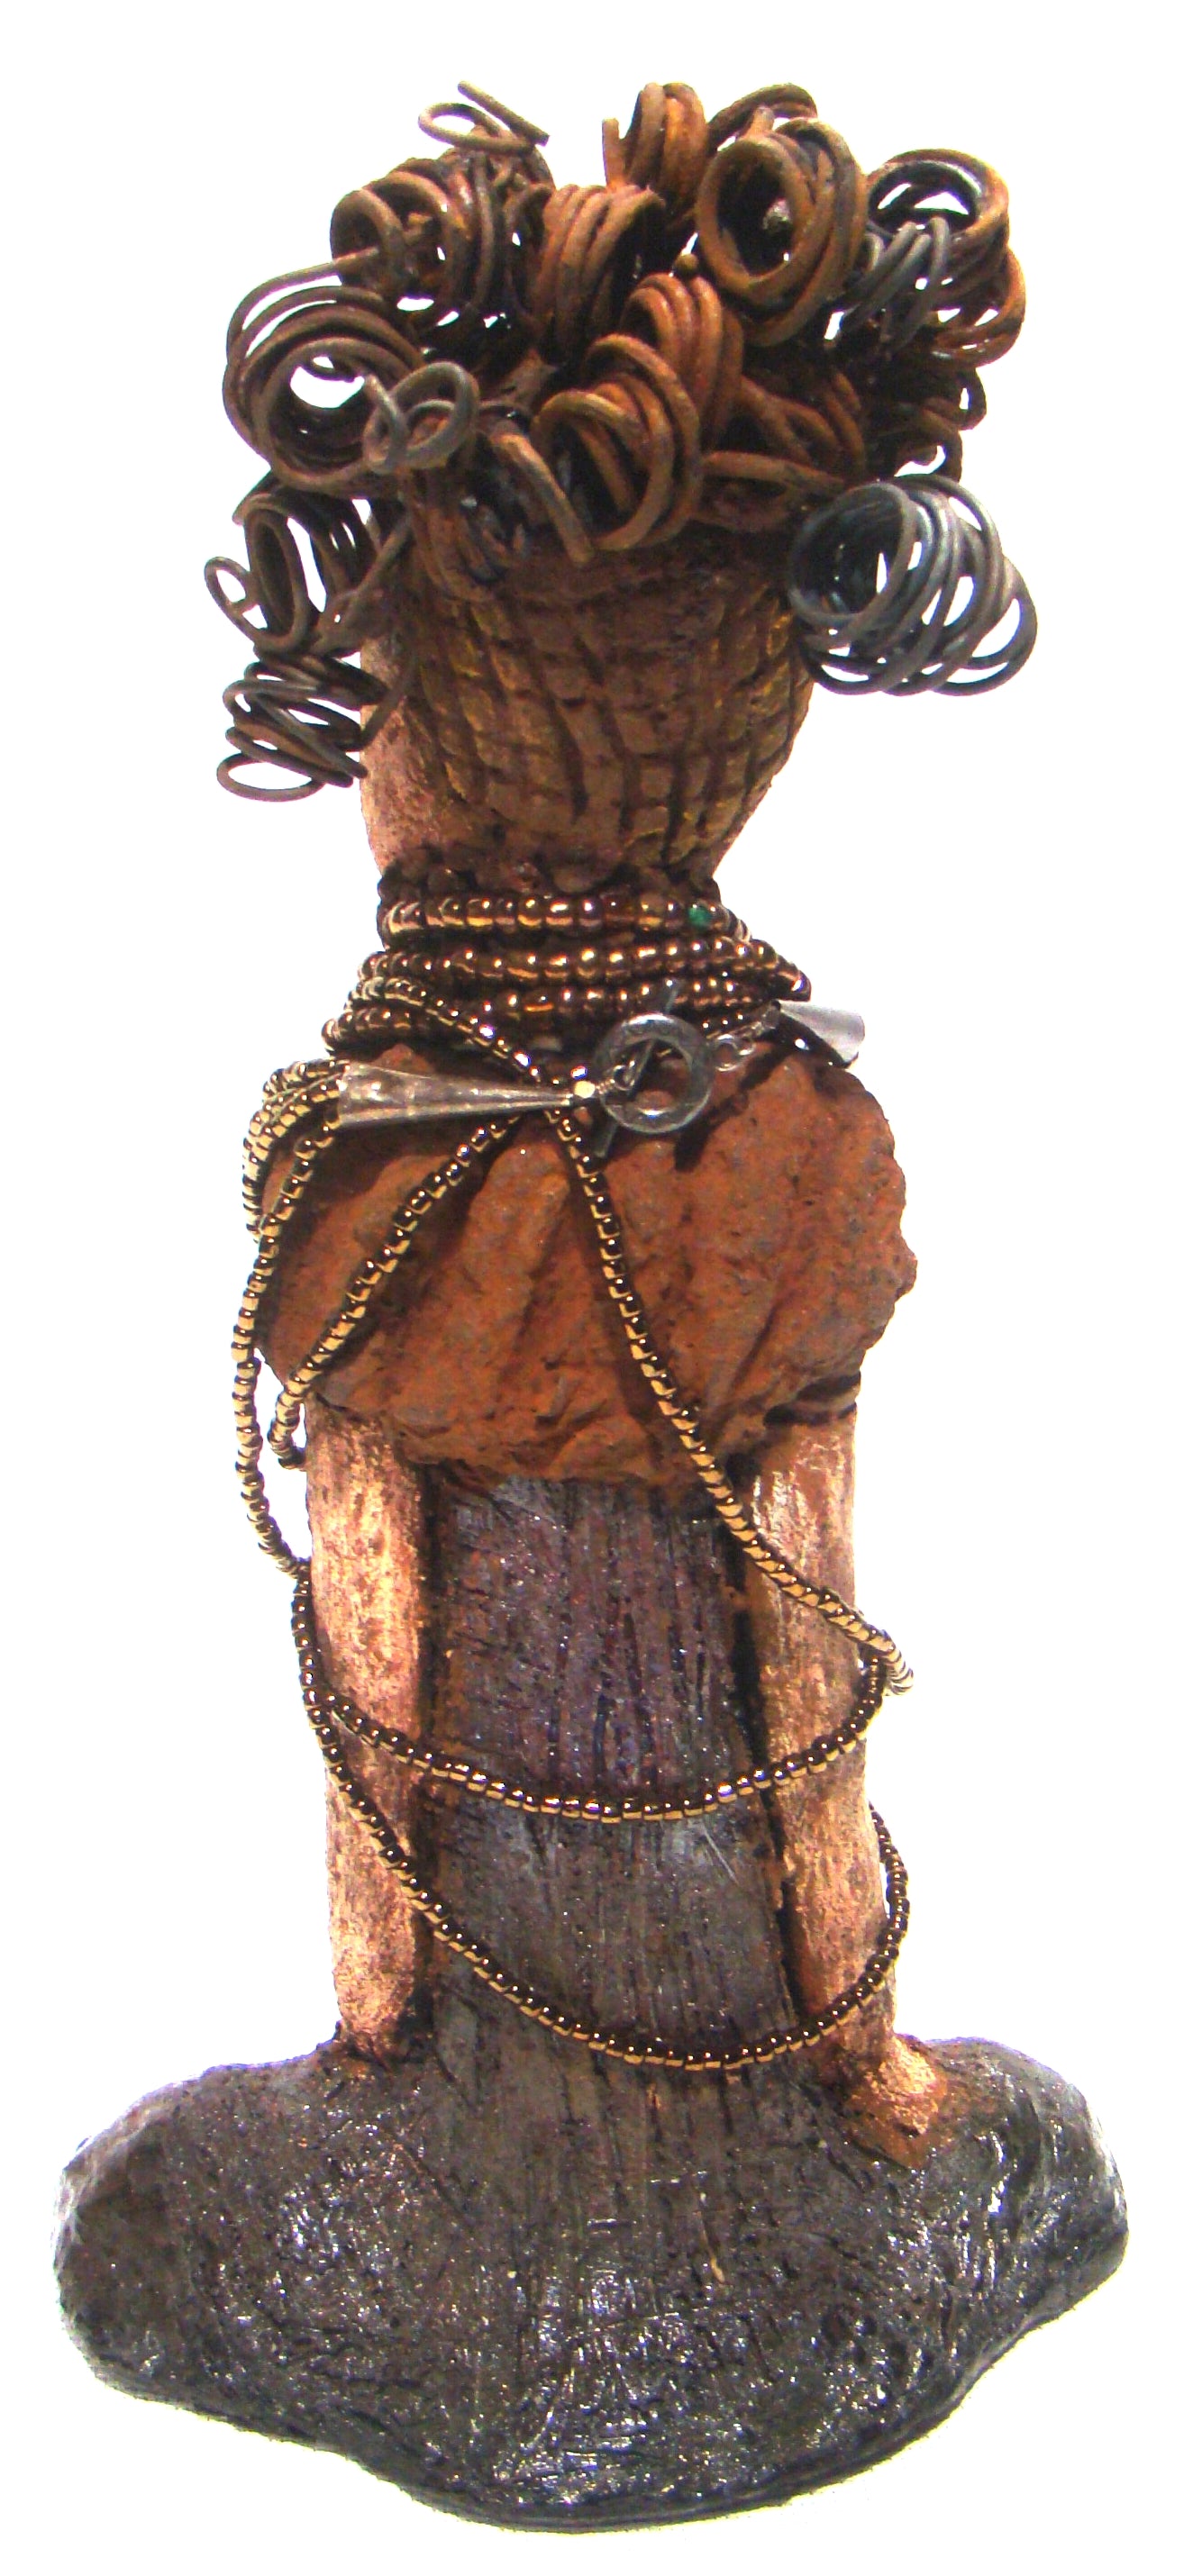 Cardi stands 11" x 5.5" x 3" and weighs 1.14 lbs. She has an awesome two tone honey beige complexion. Cardi wears a dark metallic copper dress with a chocolate ruffle scarf.  She wears a multitude of amber colored hand strung beads. I do believe Cardi would like it if you gave her a space in your home!